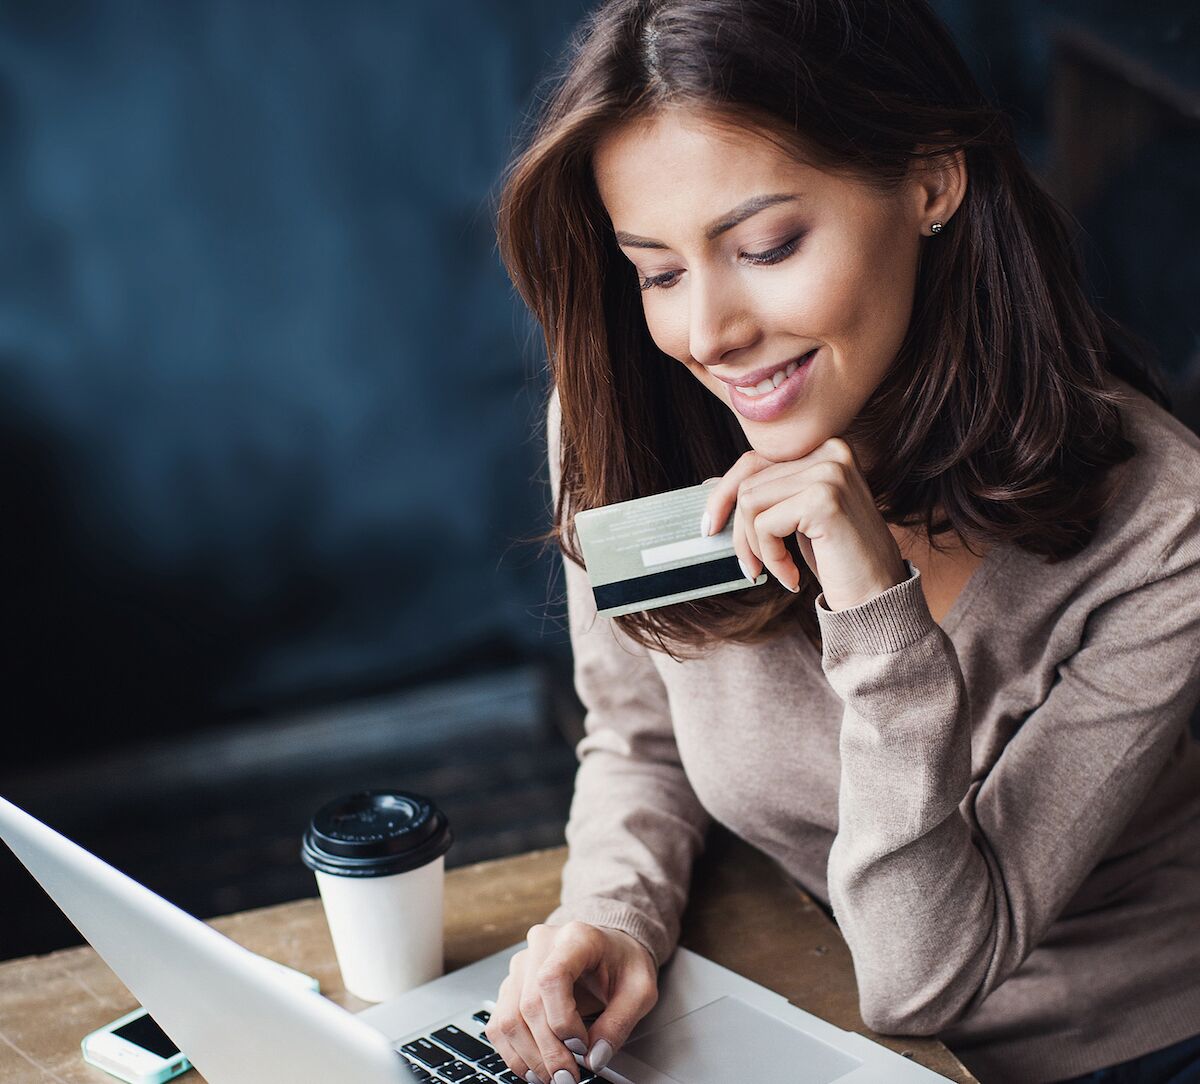 young woman with credit card